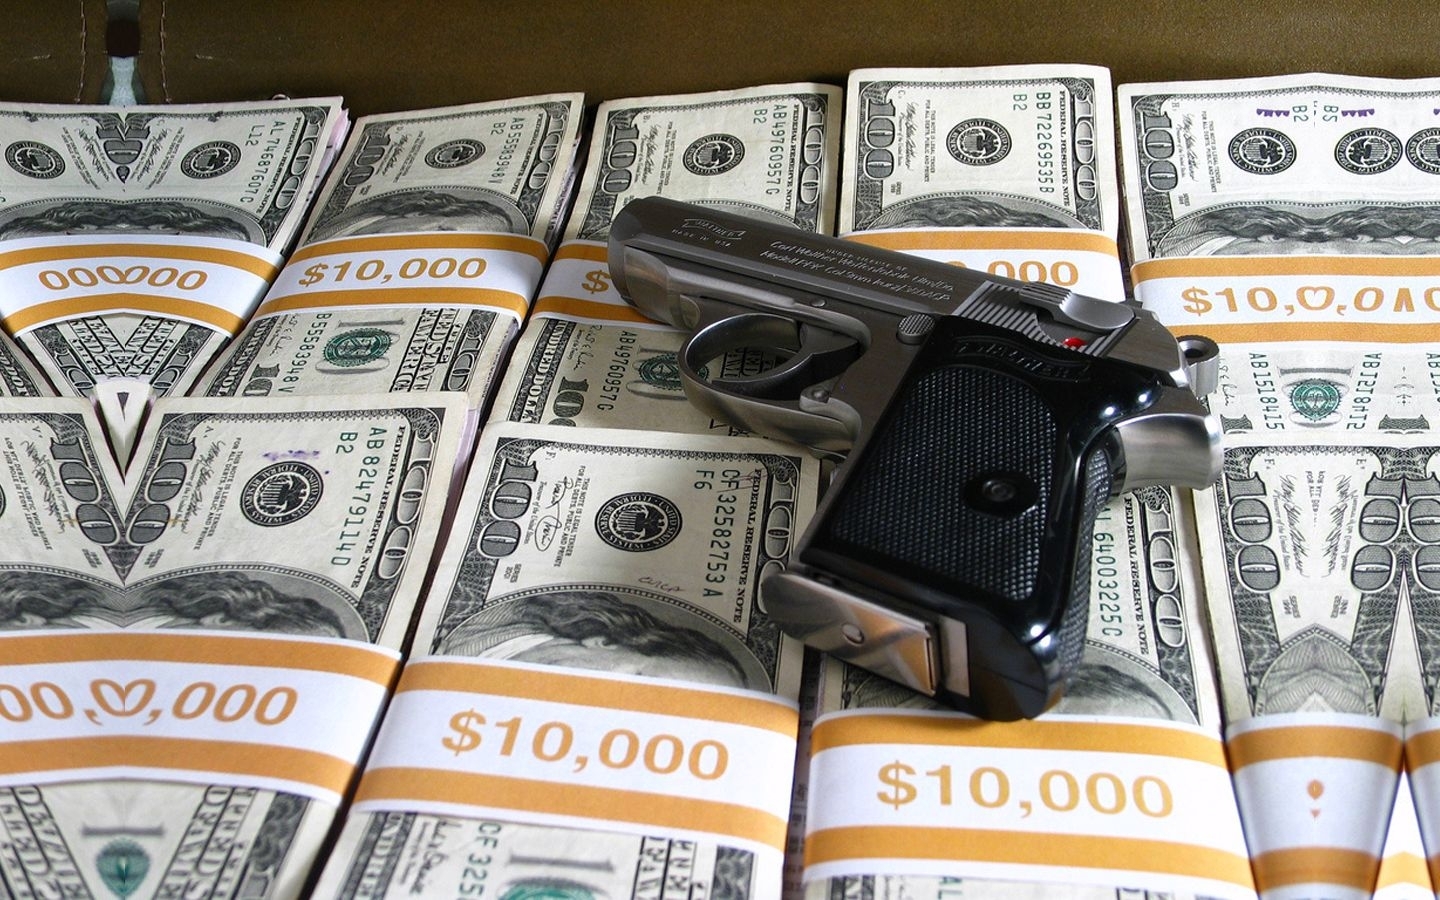 money, weapon, objects wallpapers for tablet